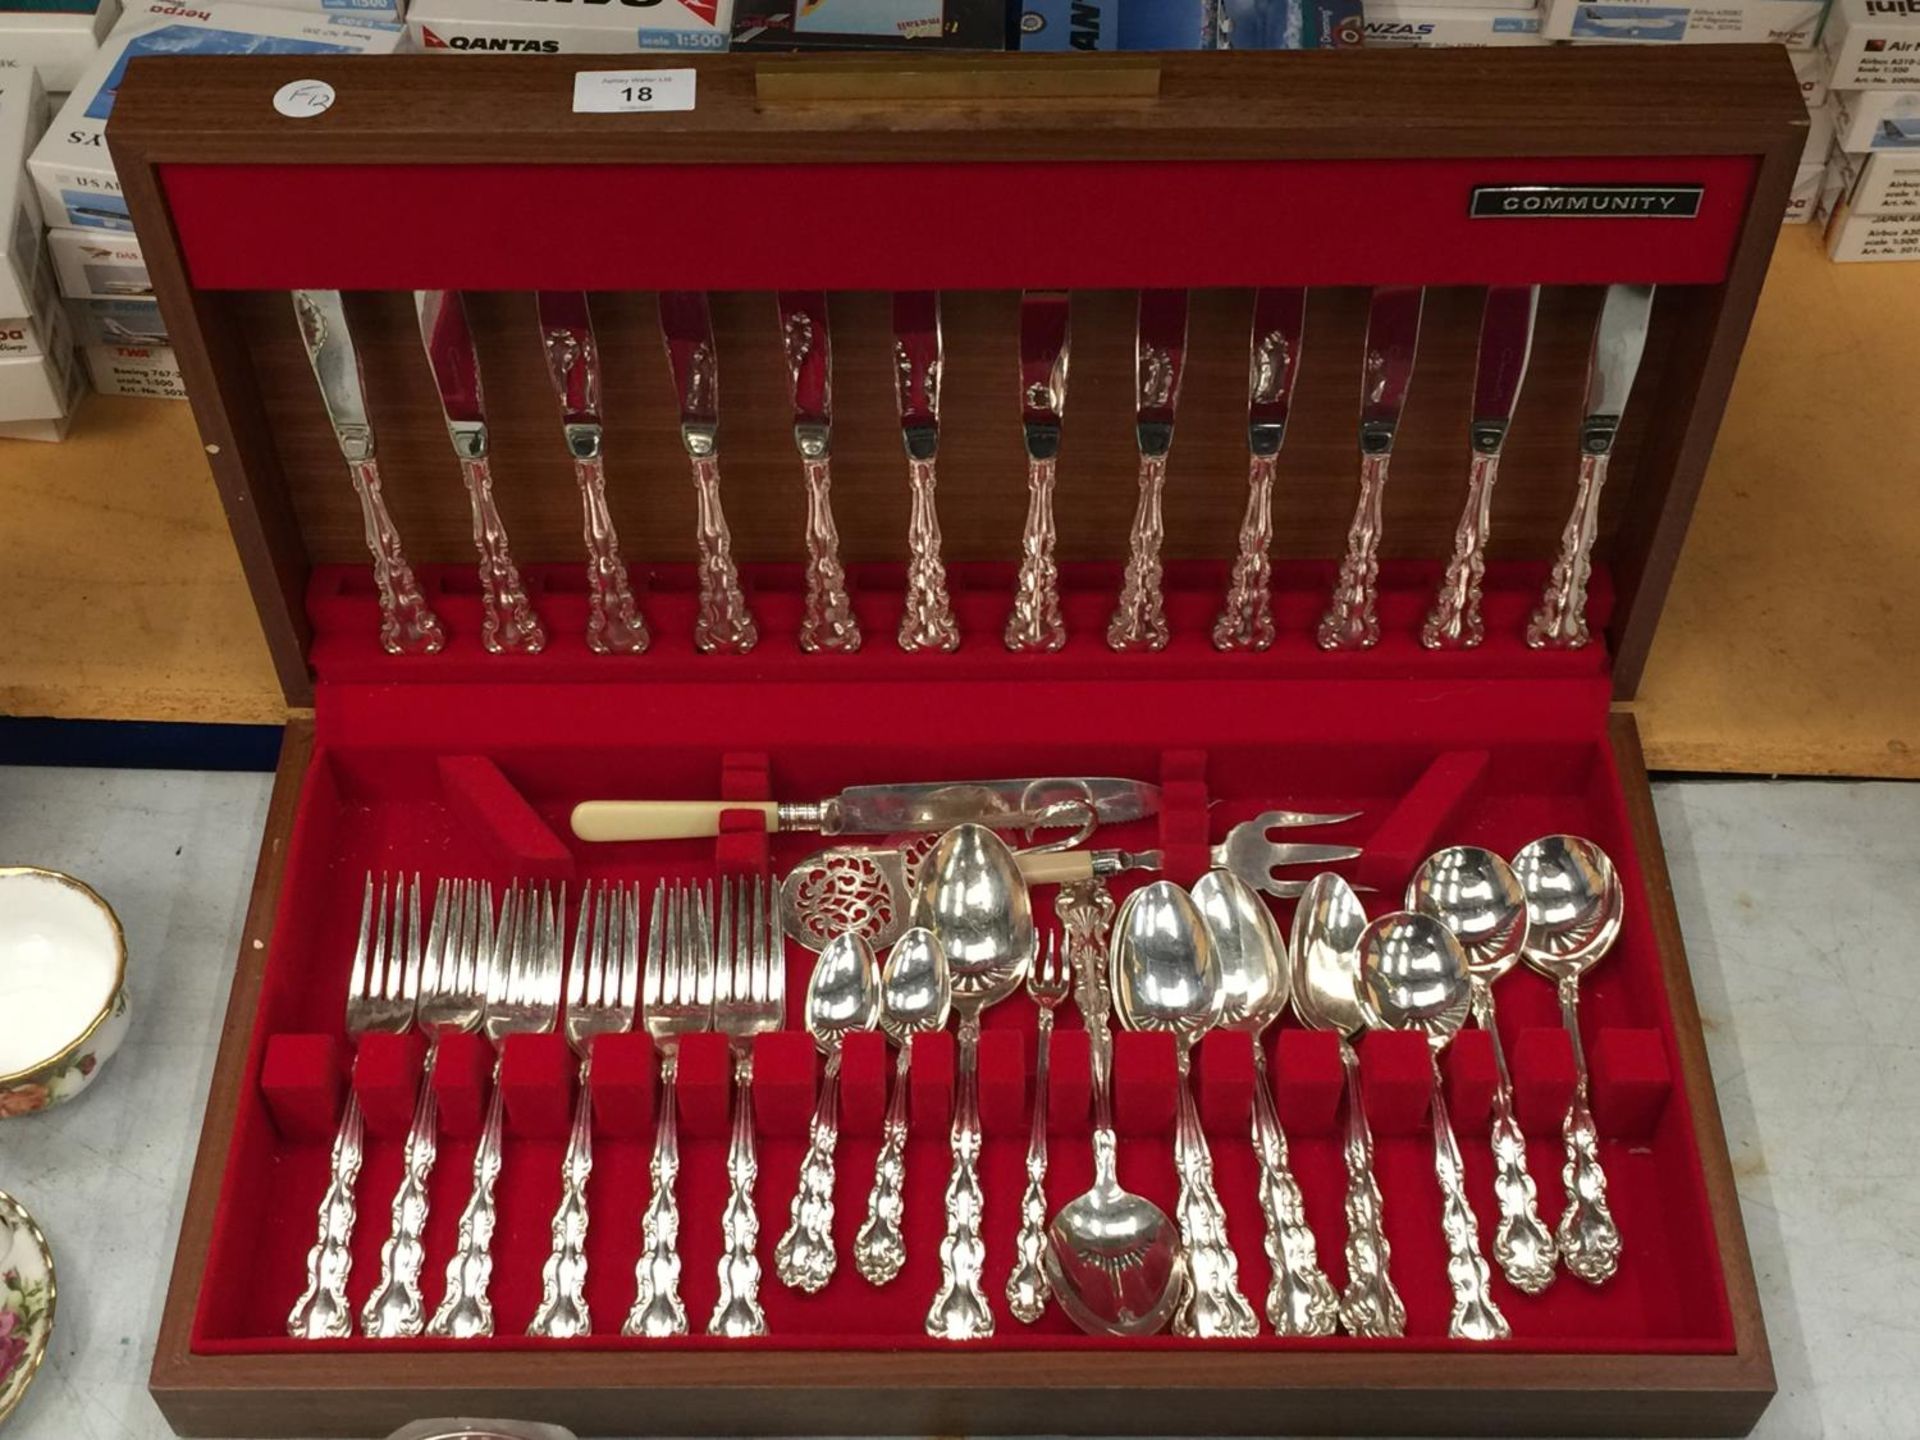 A 48 PIECE COMMUNITY FLATWARE SET IN DISPLAY CASE - Image 2 of 12